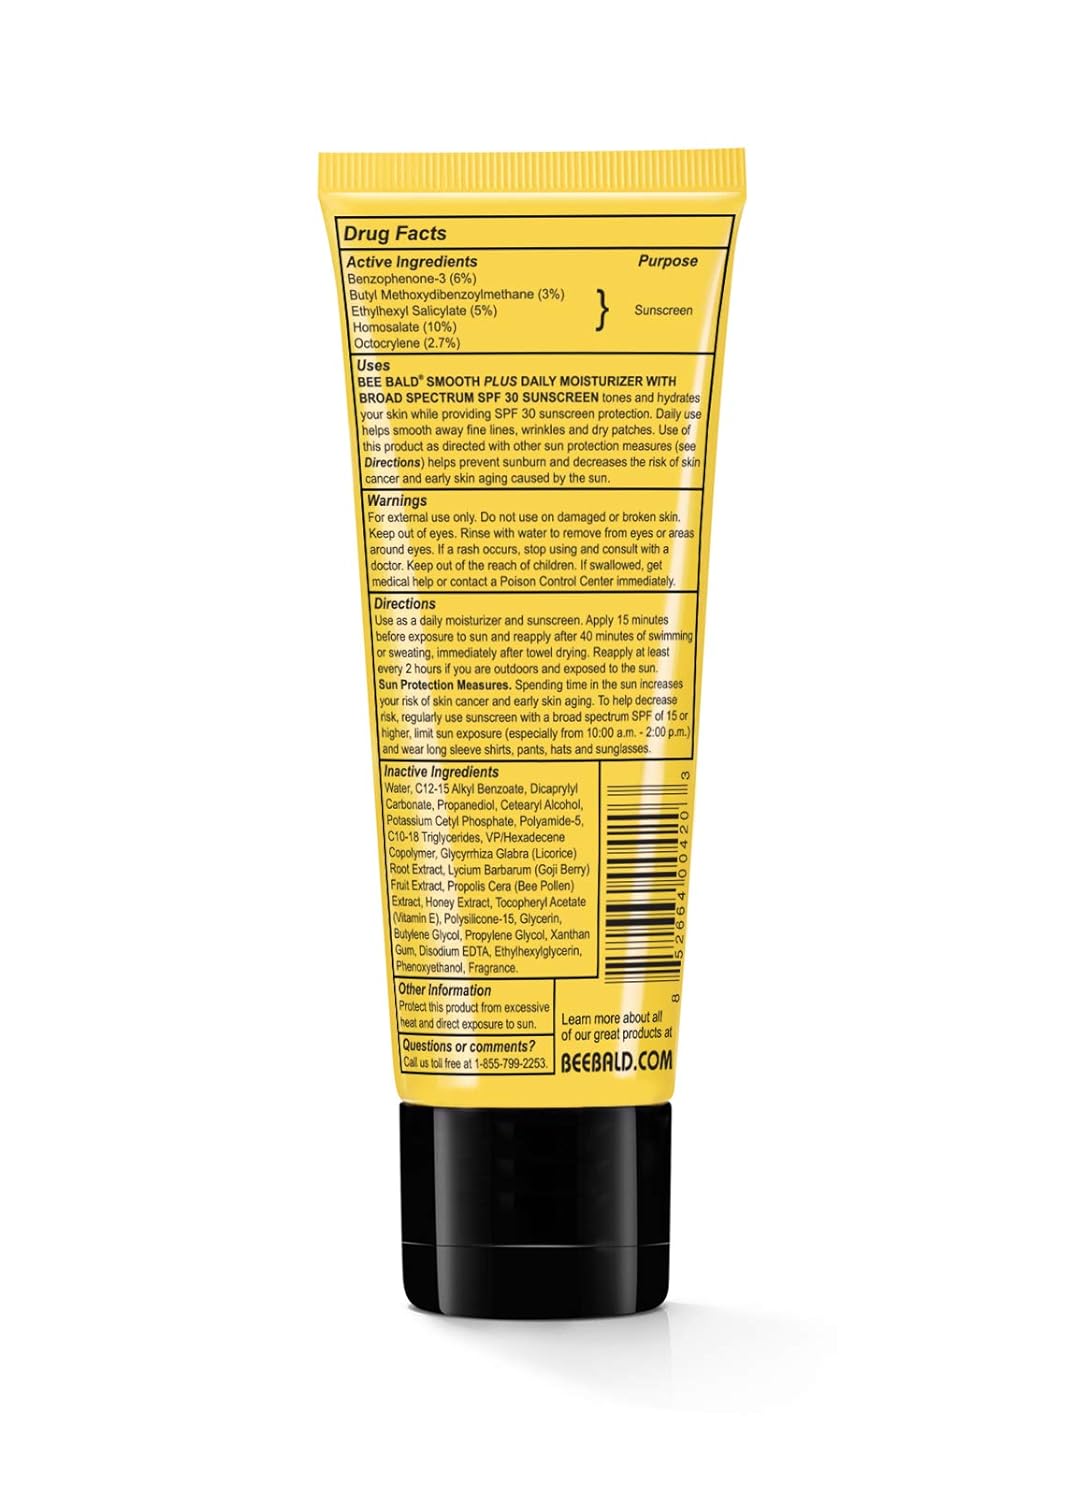 Bee Bald SMOOTH PLUS Daily Moisturizer With SPF 30 Broad Spectrum Sunscreen - Head and Face Moisturizer Lotion for Men and Women Too - Hydrate and Protect Skin from Harmful UVA/UVB Rays - 1.7 fl Oz : Beauty & Personal Care